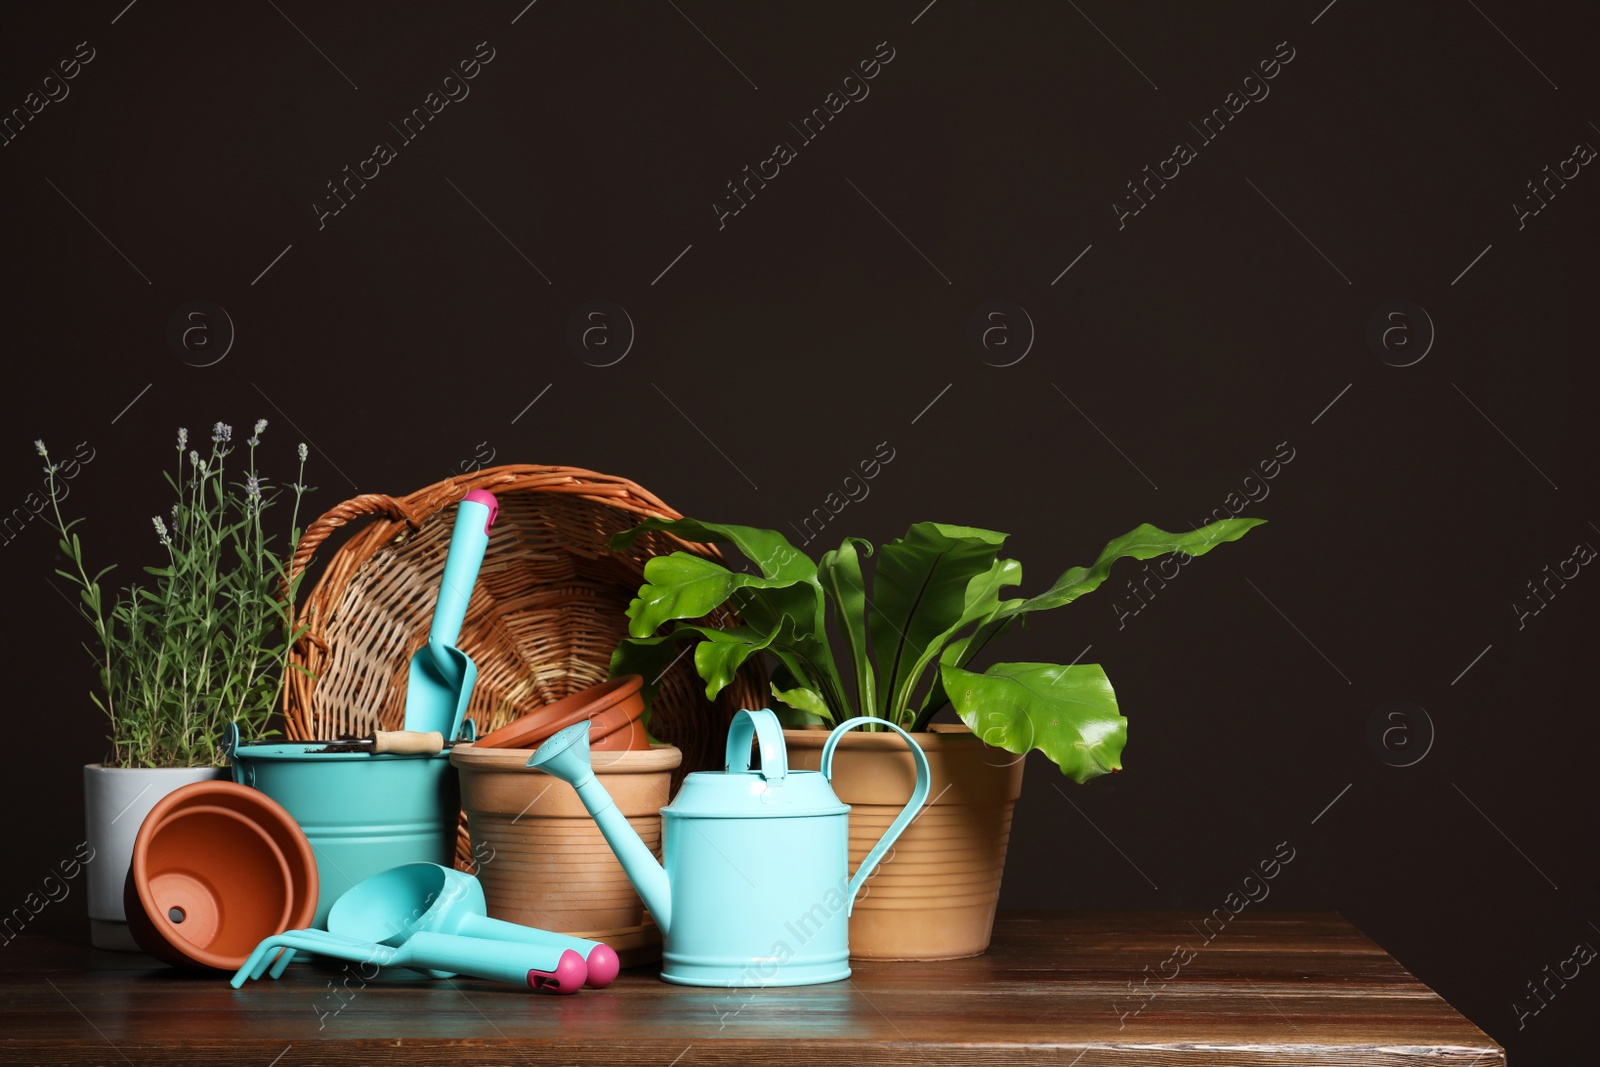 Photo of Beautiful plants and gardening tools on wooden table against brown background